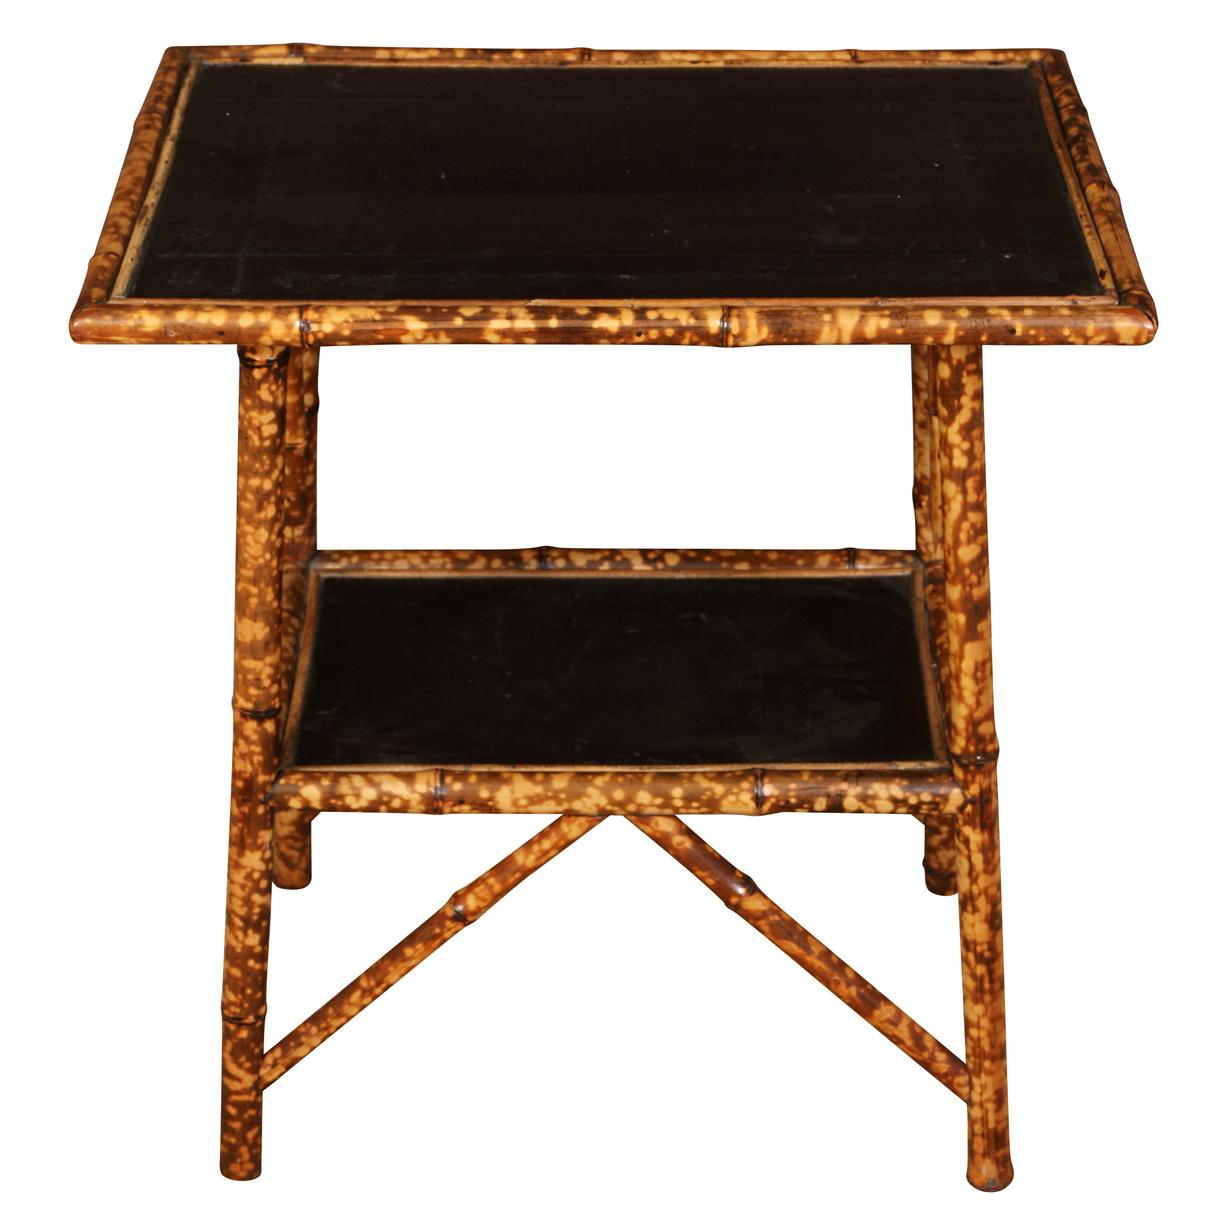 This charming bamboo side  table is a great way to add some interest to a room.  The tabletop and lower shelf are covered in black leather with a Greek key design.   This  little piece would work as a side table, bedside table, in an office,